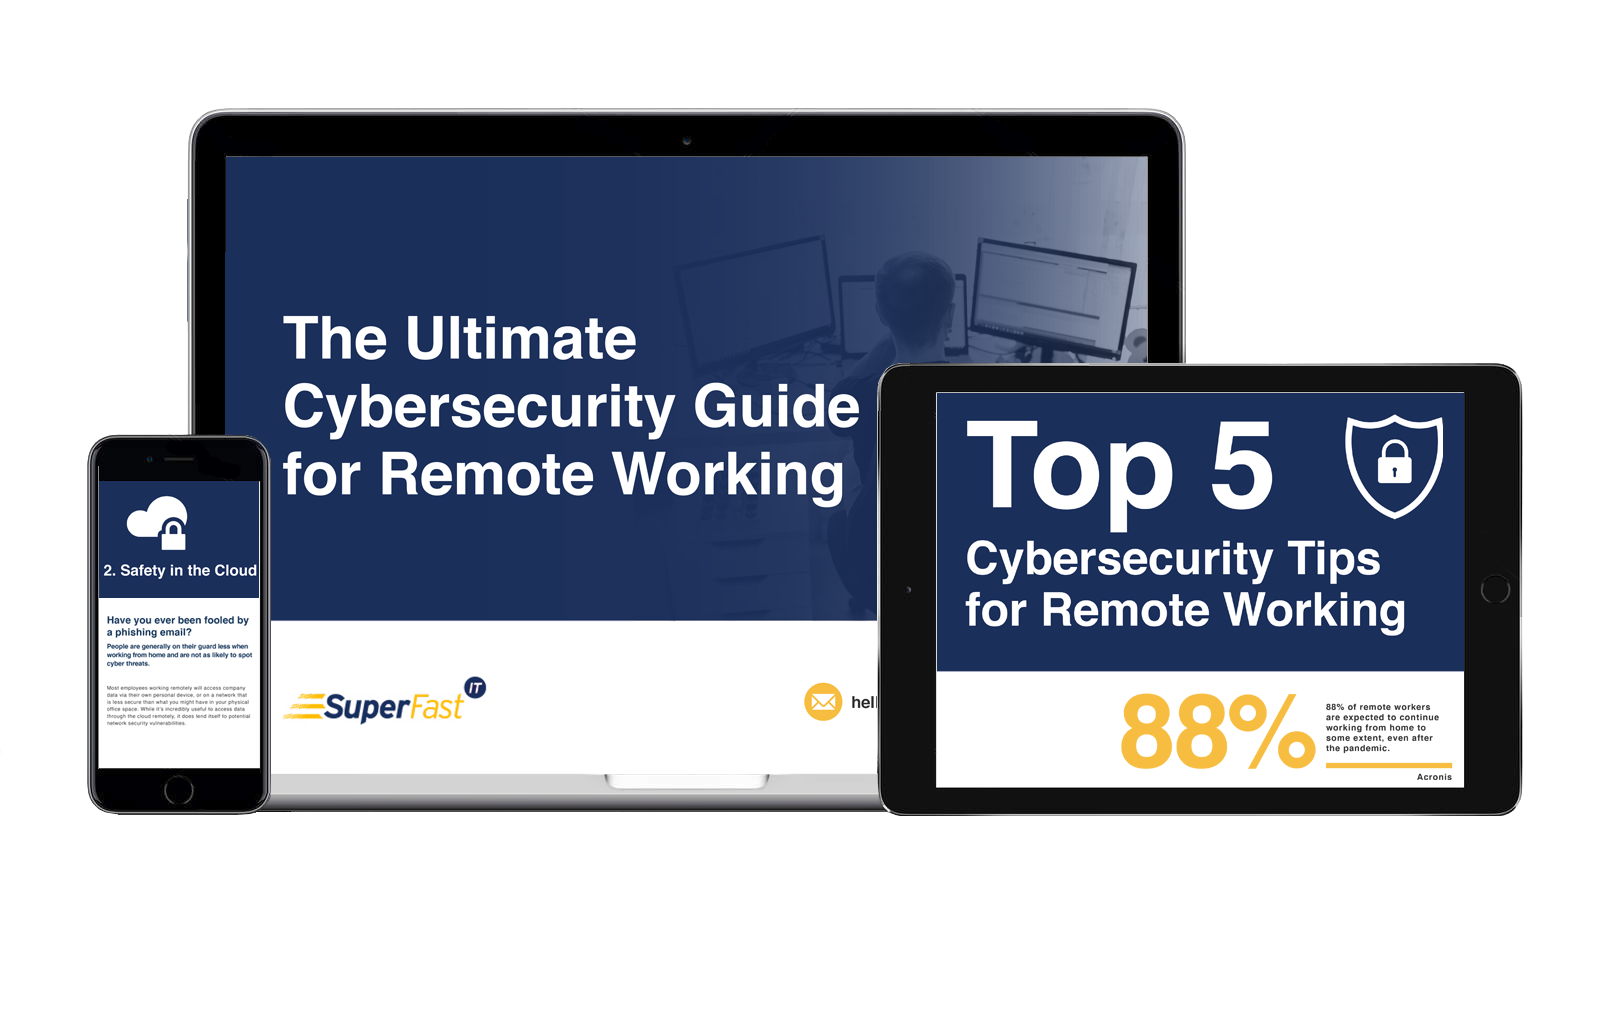 The Ultimate cyber security guide for remote working